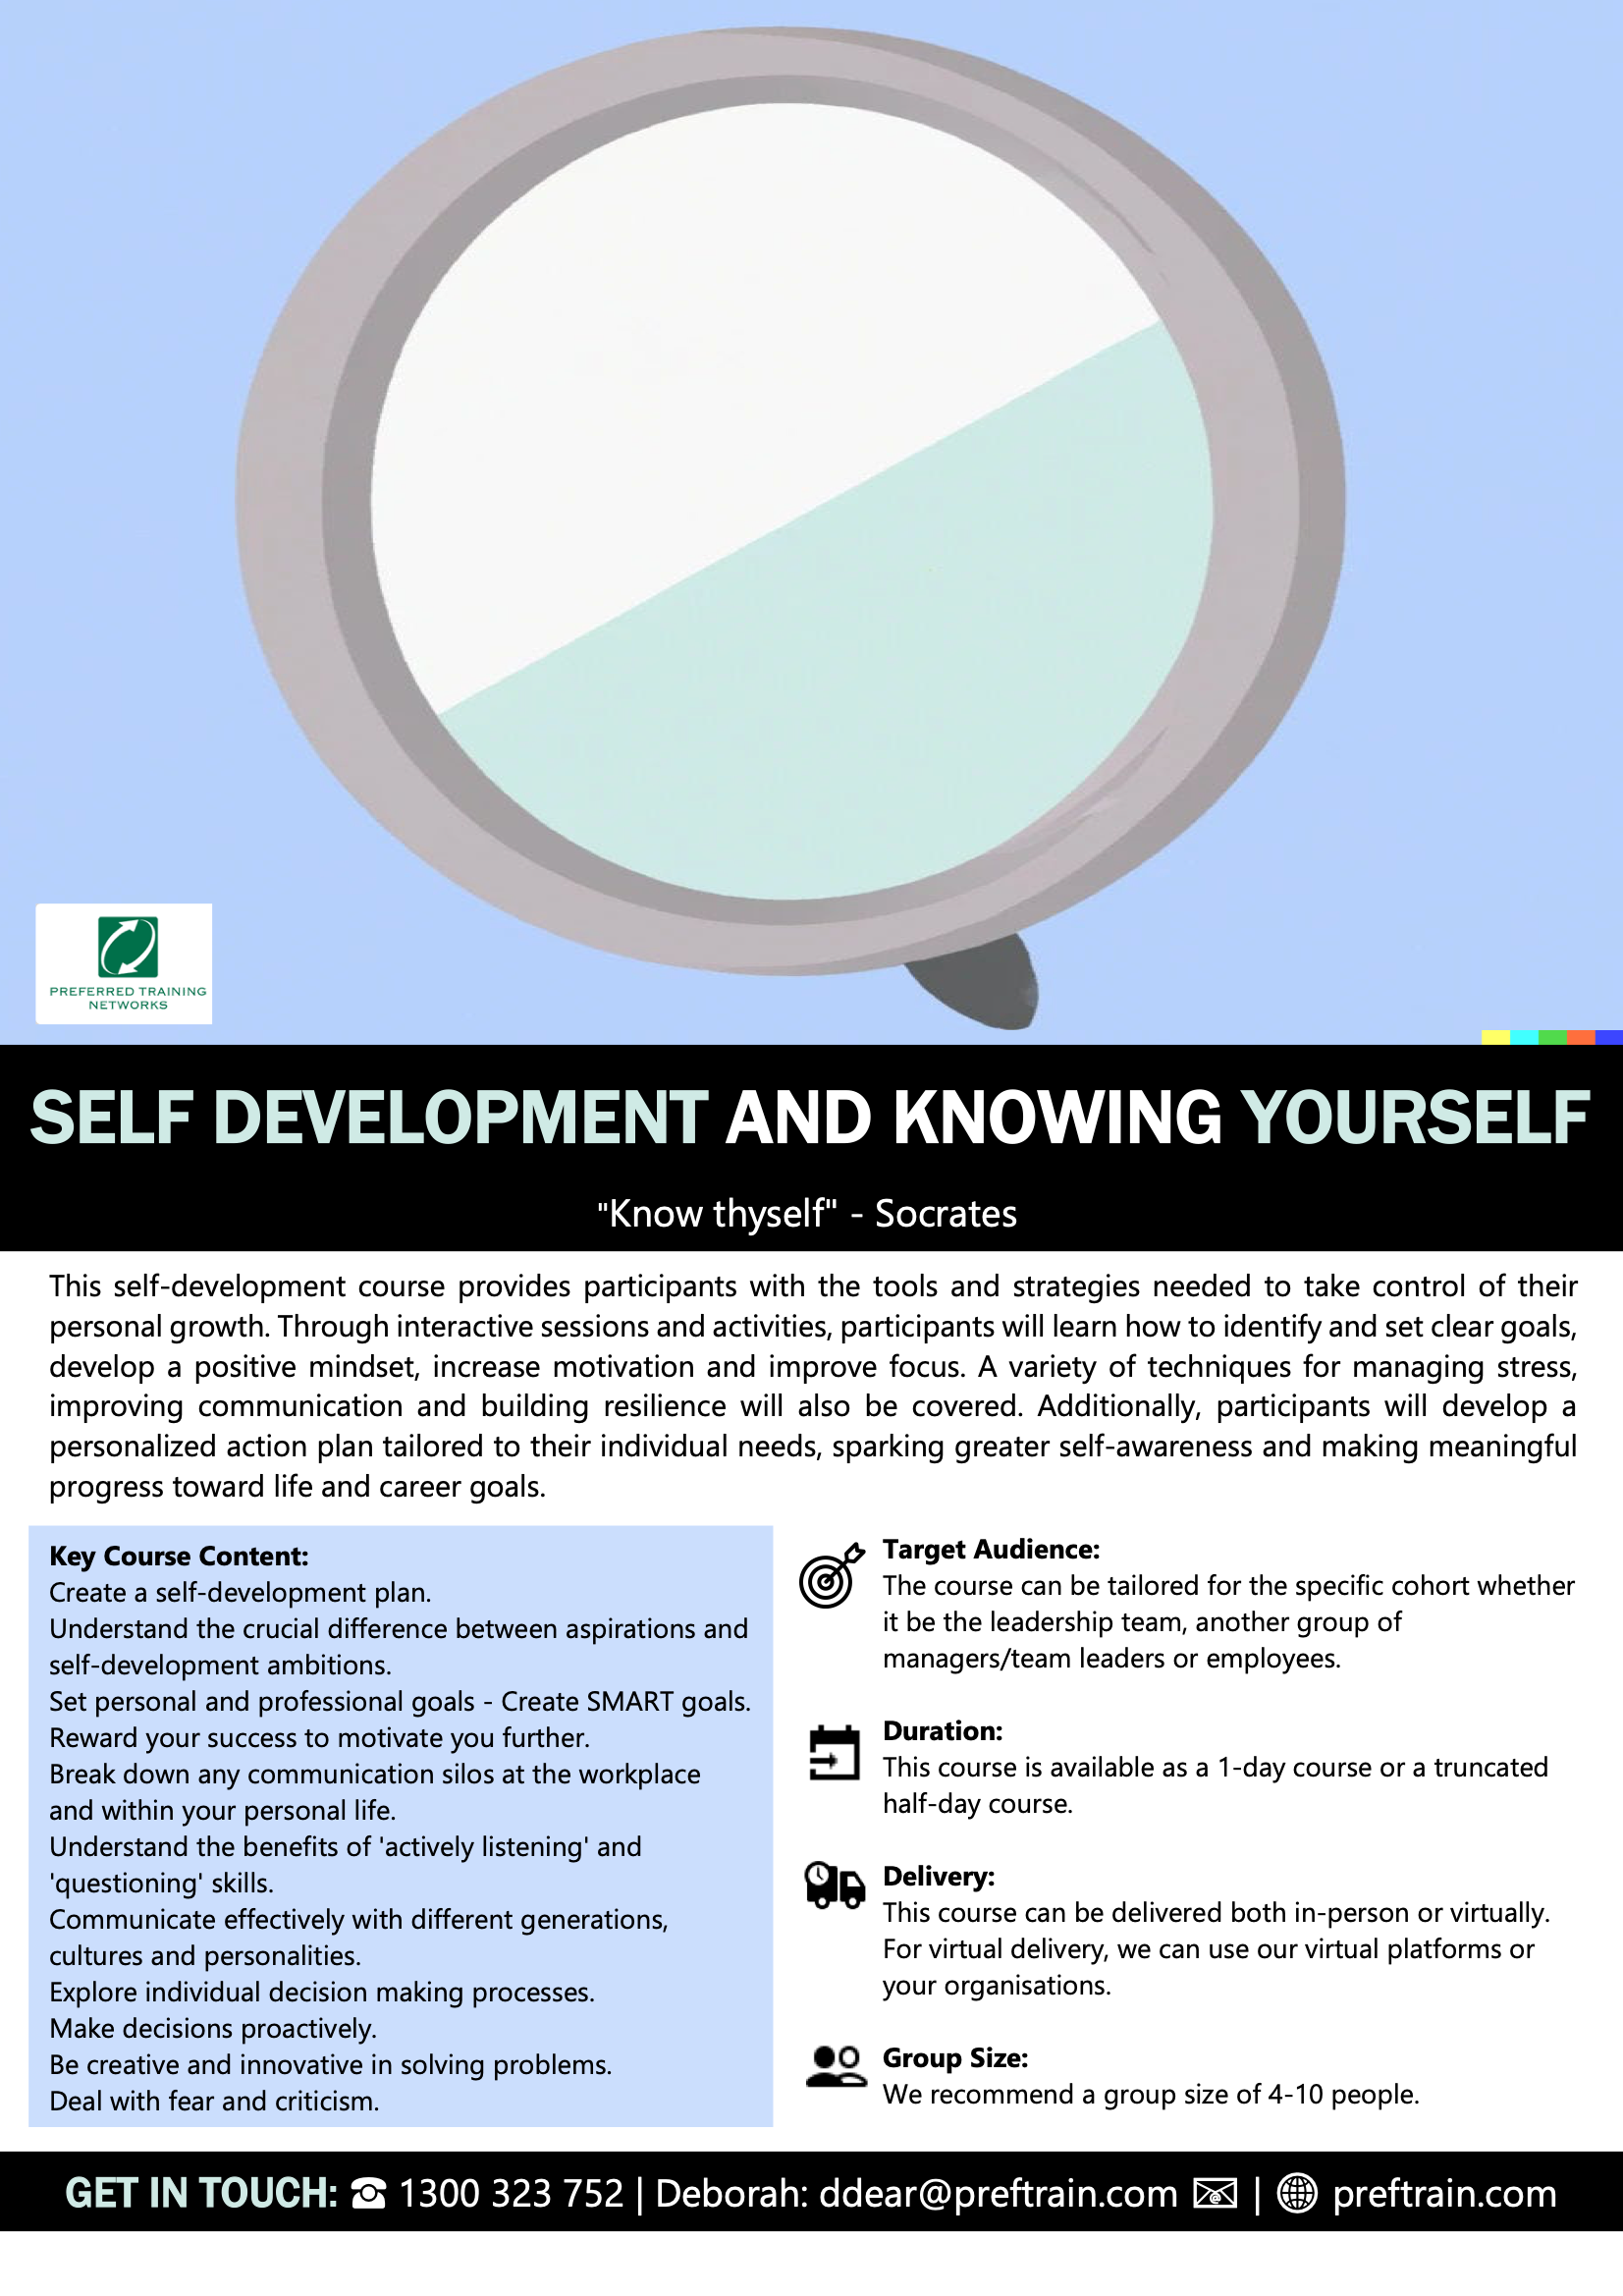 Self Development -conscious pursuit of personal growth